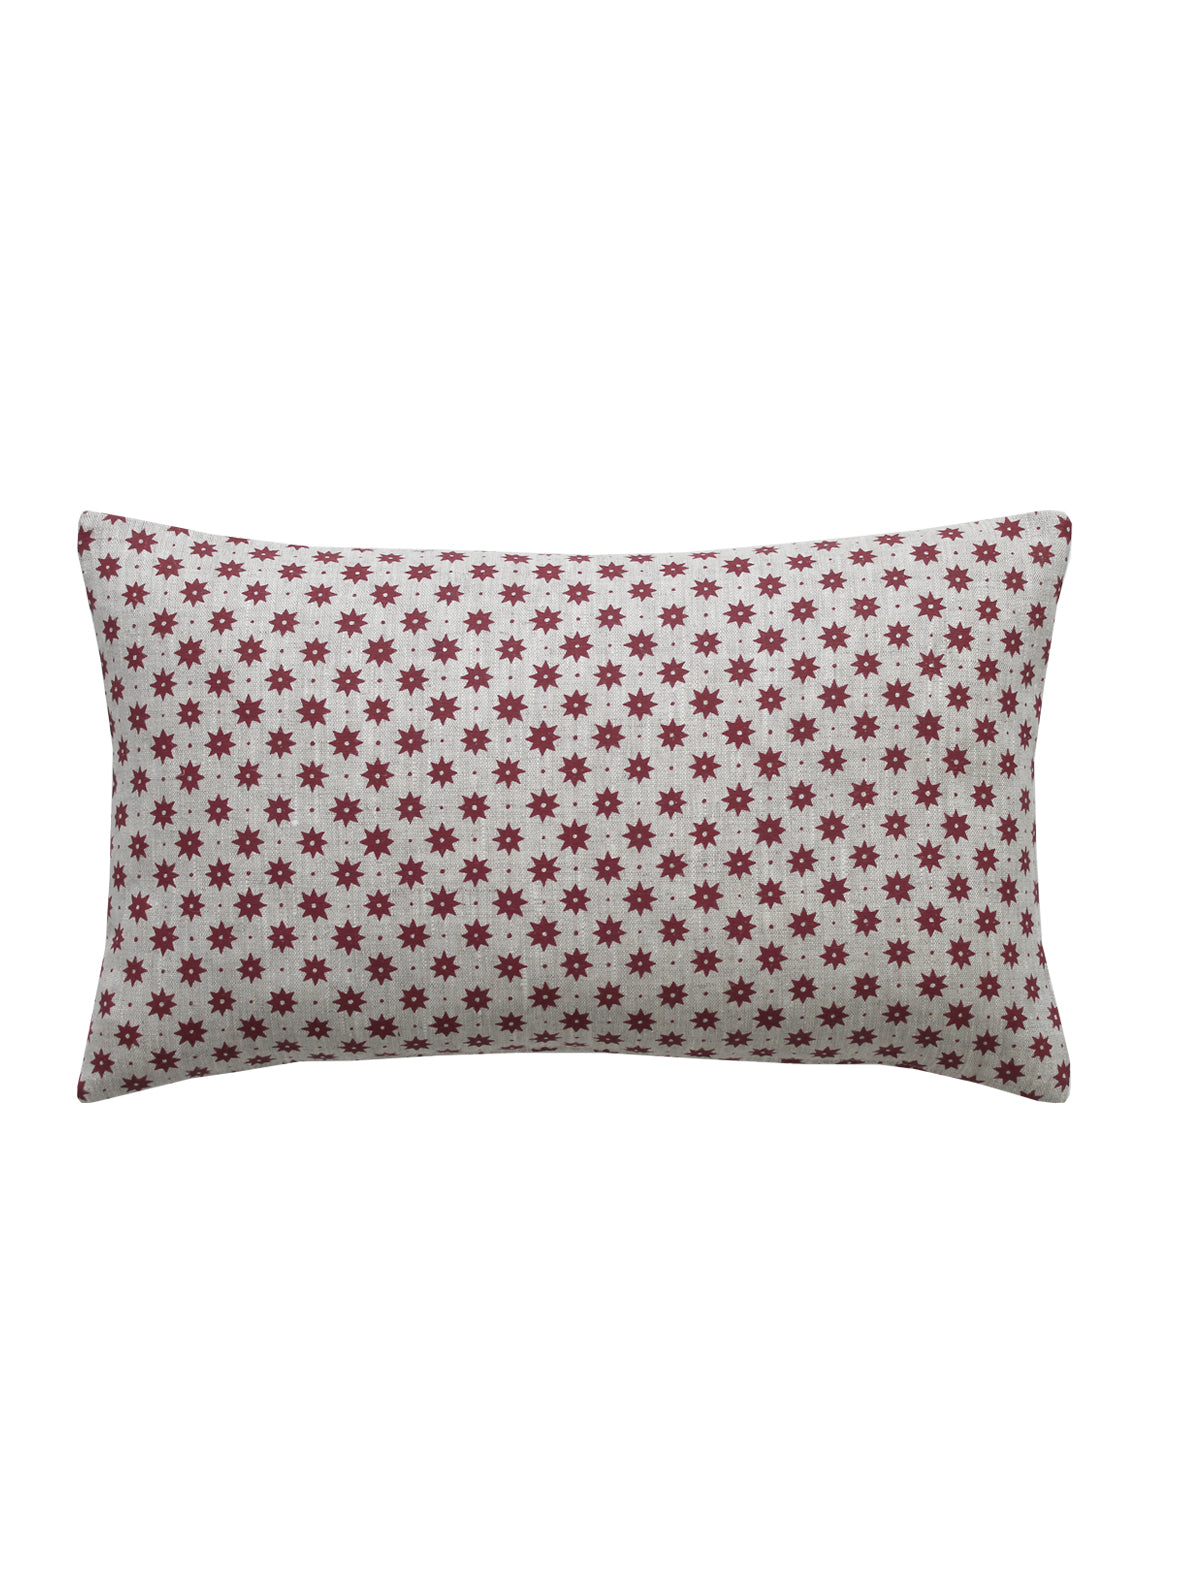 Petite Etoile French Raspberry Scatter Cushion